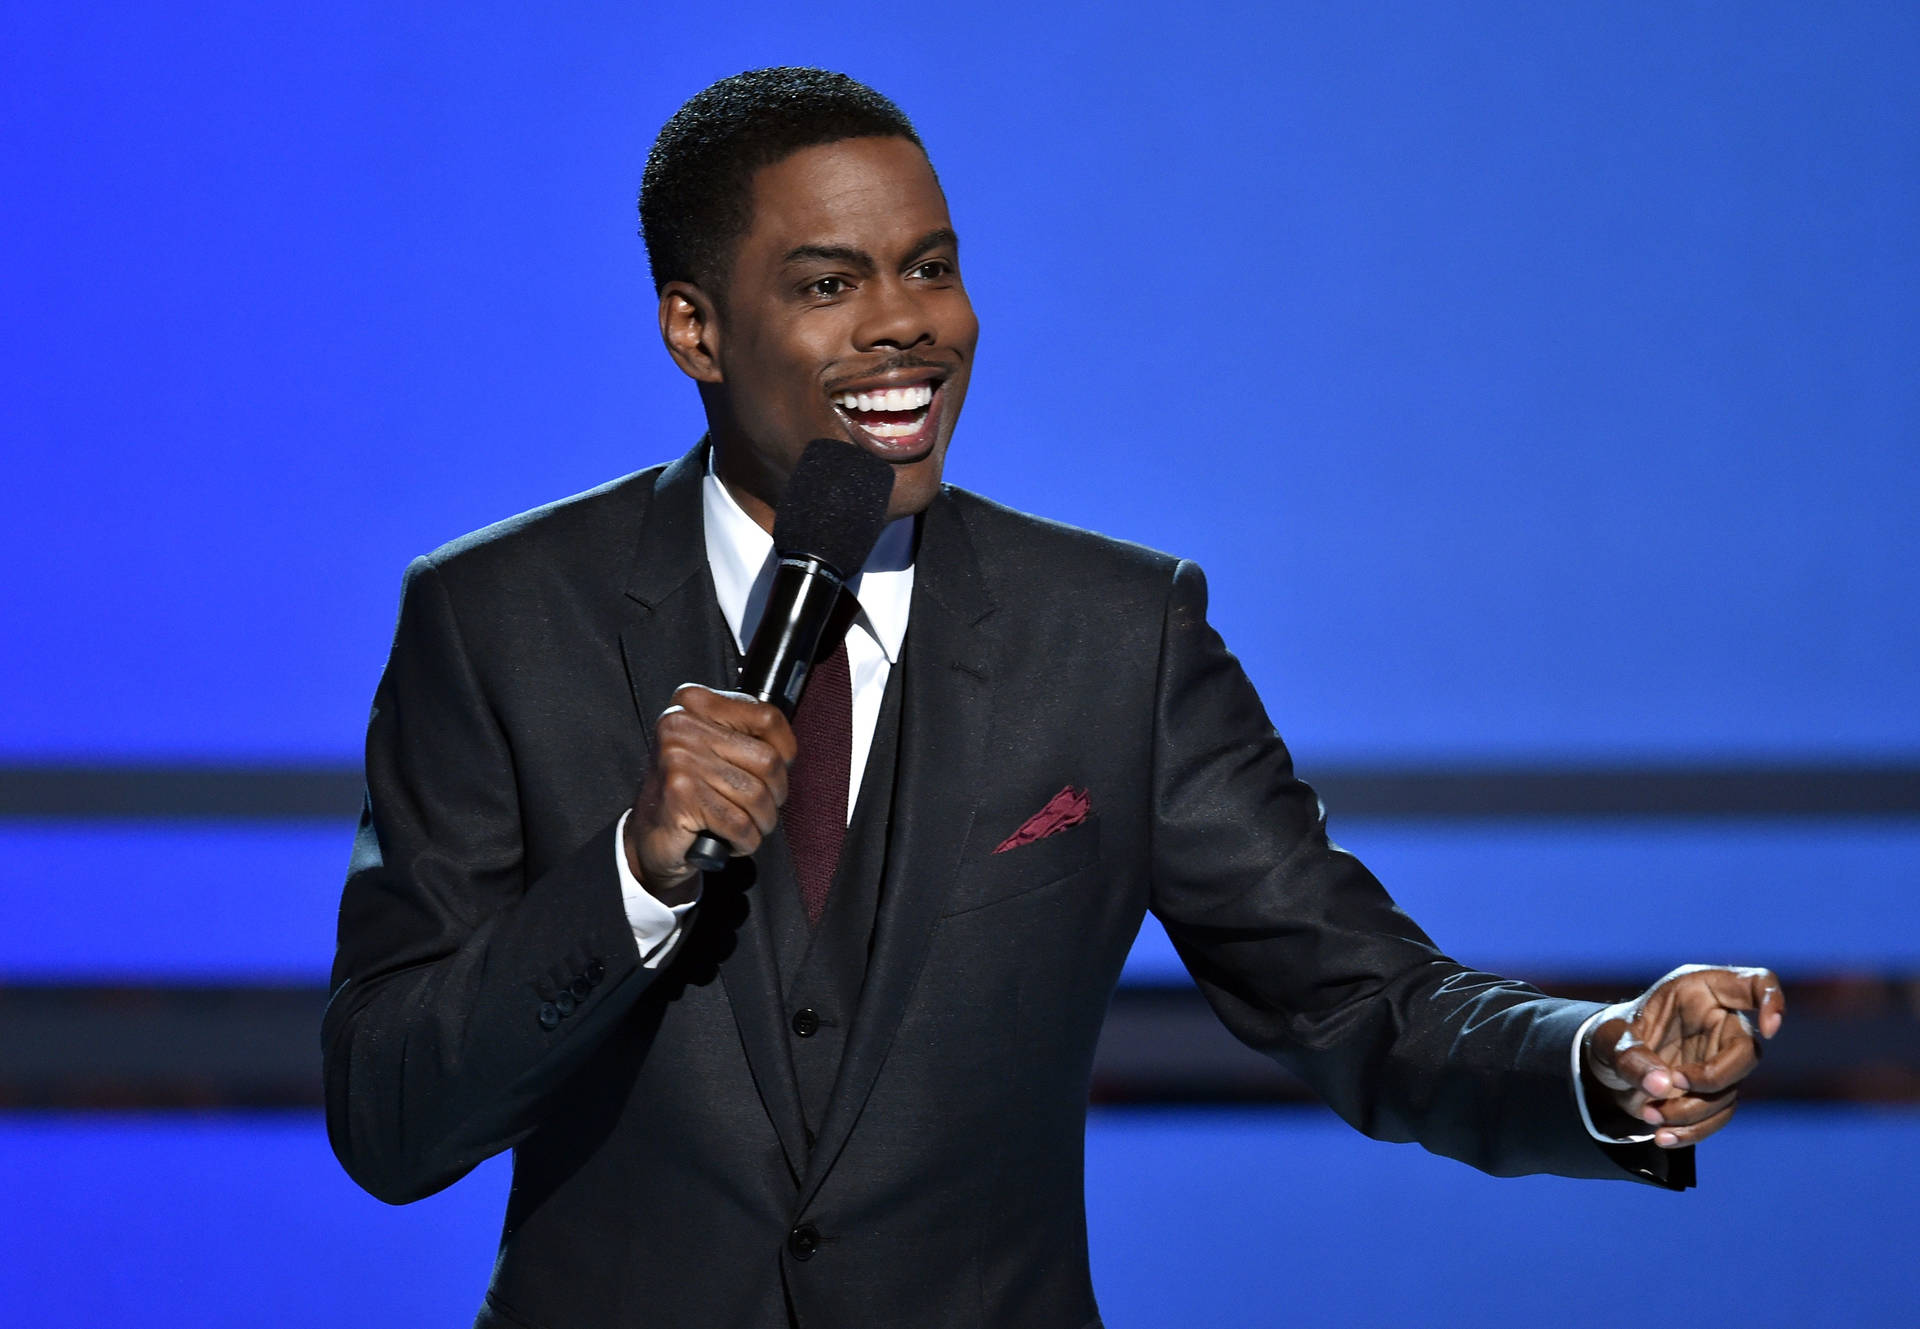 Chris Rock Delivering A Stand-up Performance Background